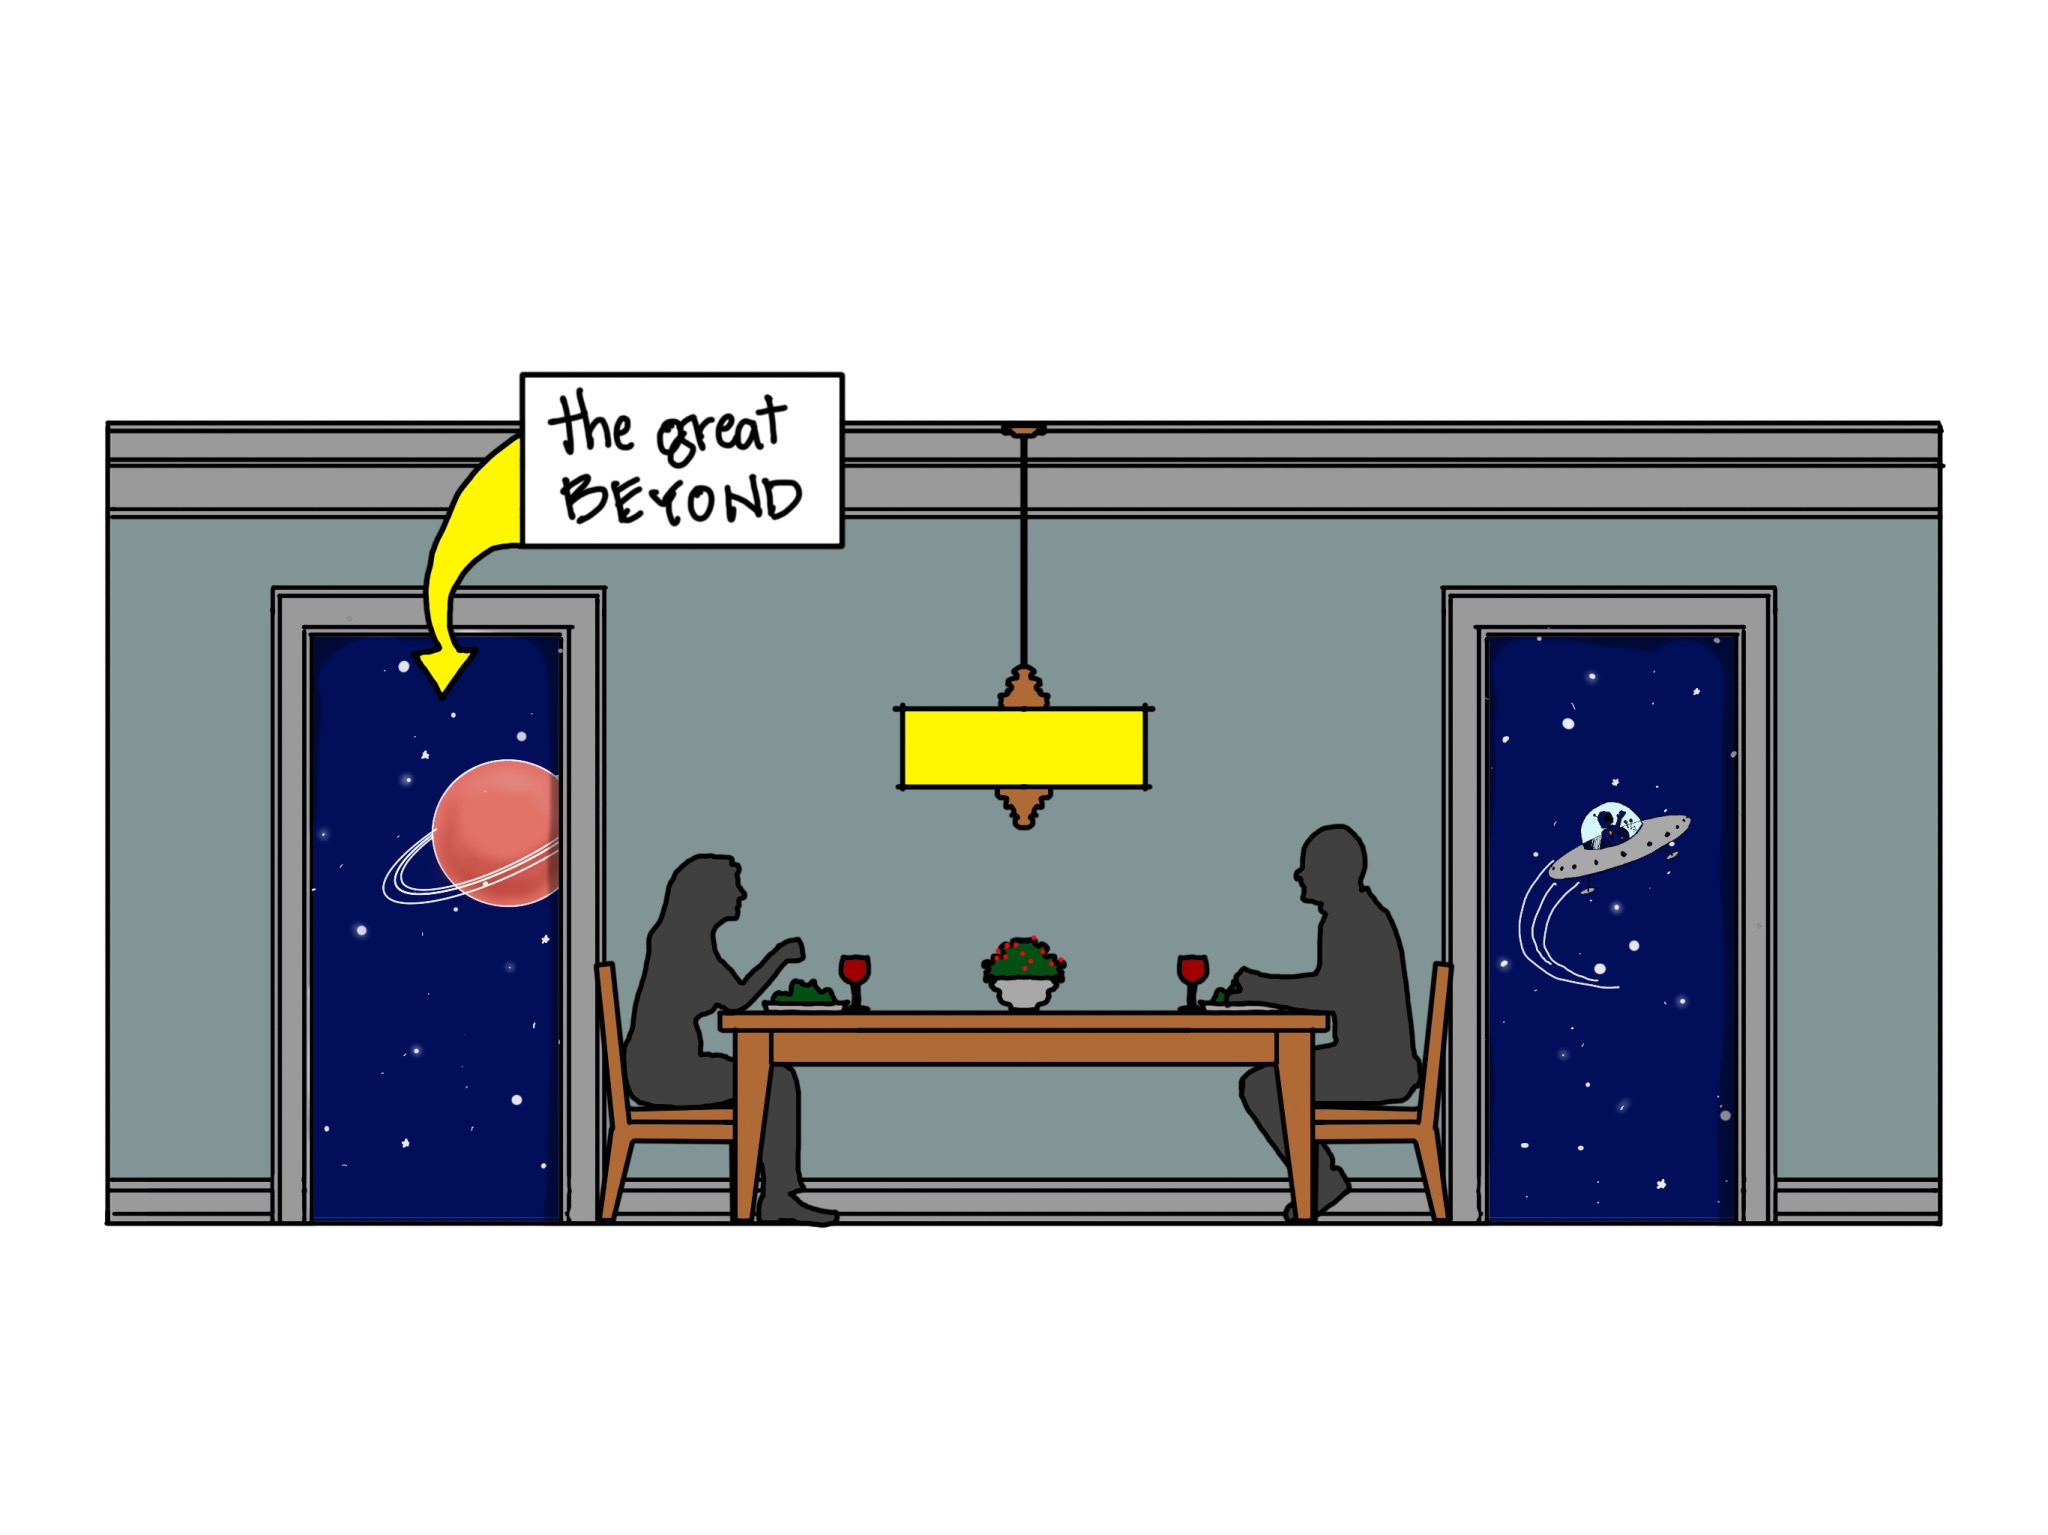 An illustration of two people sitting at a dining room table, depicted in profile. There are two doors behind each person. The left door shows a picture of space, including a planet with a ring around it. A text bubble above the door says "the great BEYOND" with an arrow pointing to the planet. The right door shows outer space also with a flying saucer.